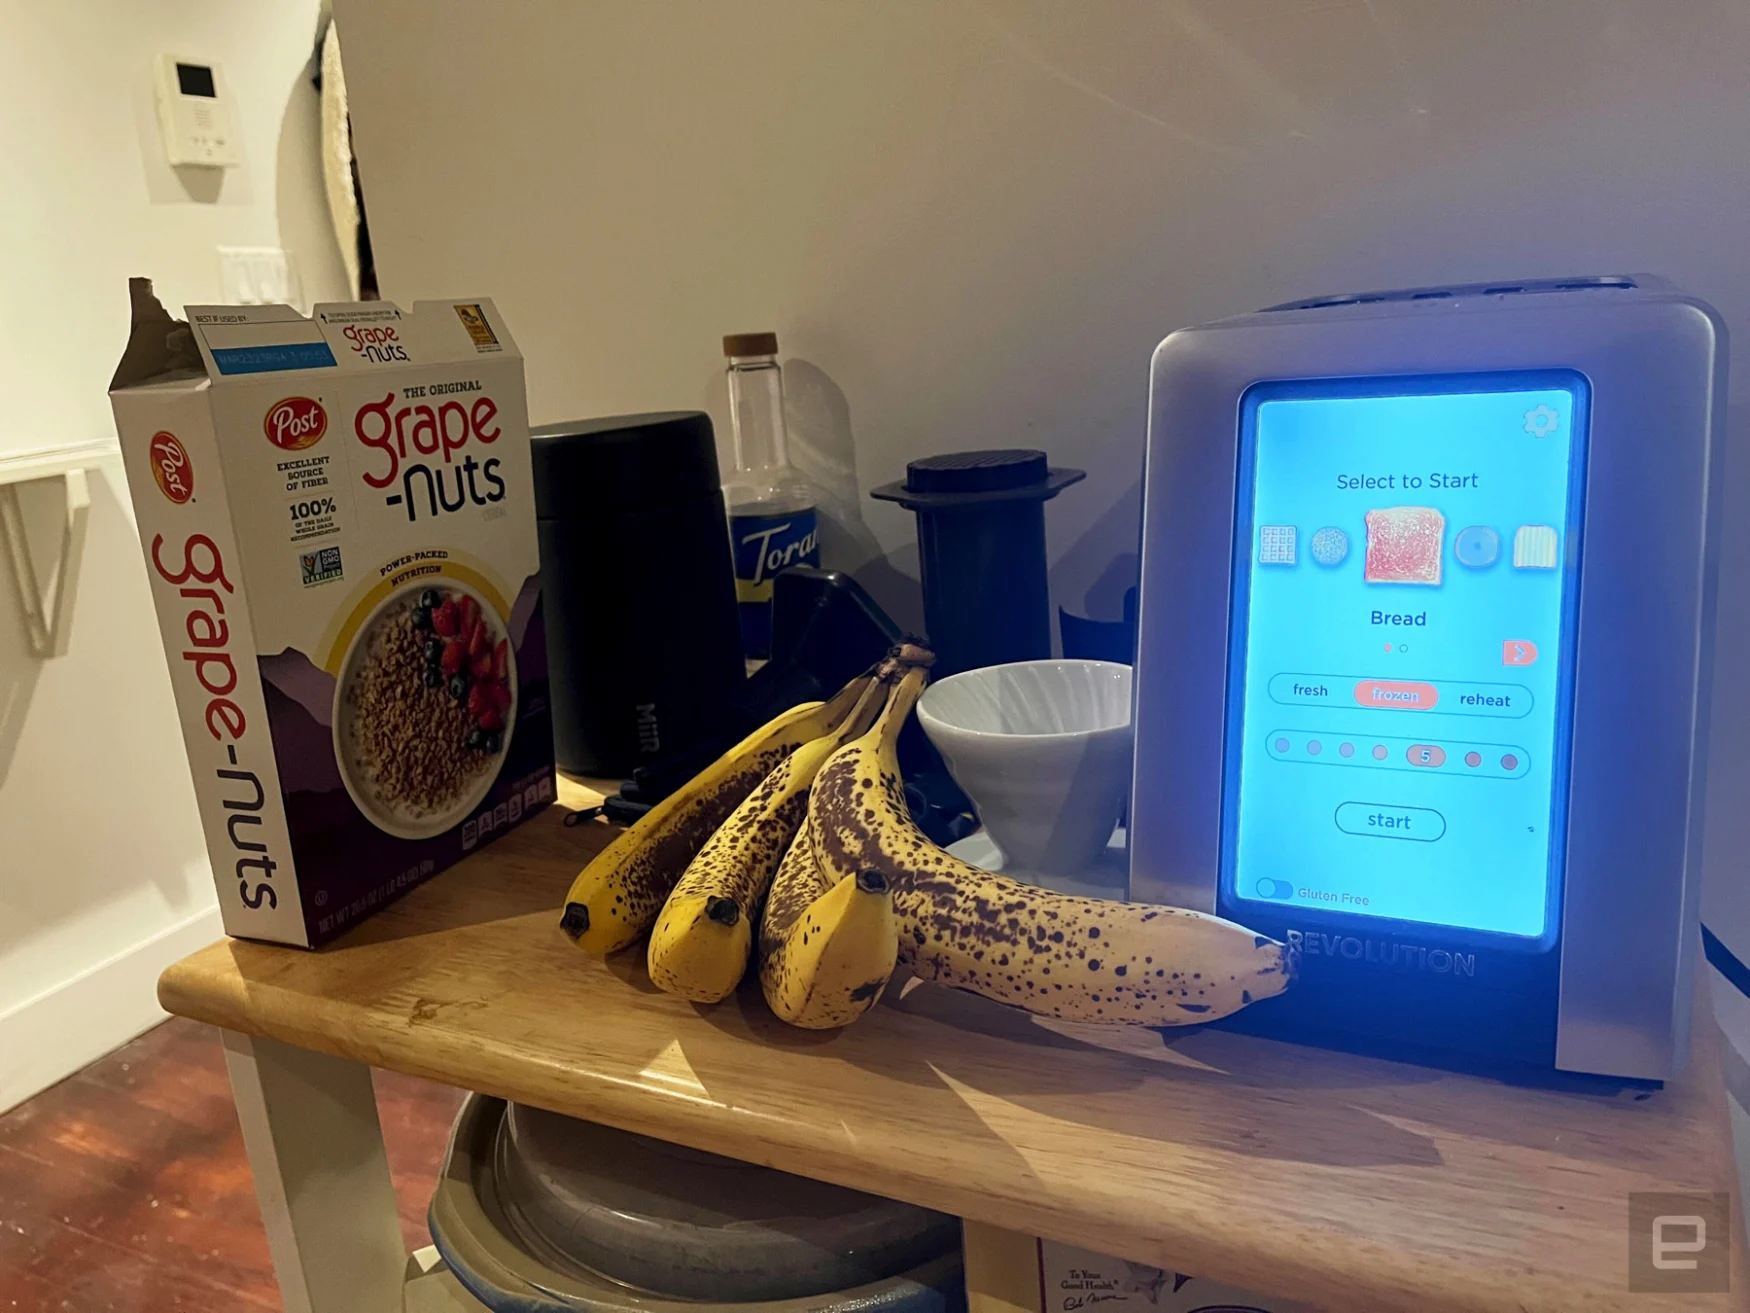 Revolution InstaGLO R180B Toaster review